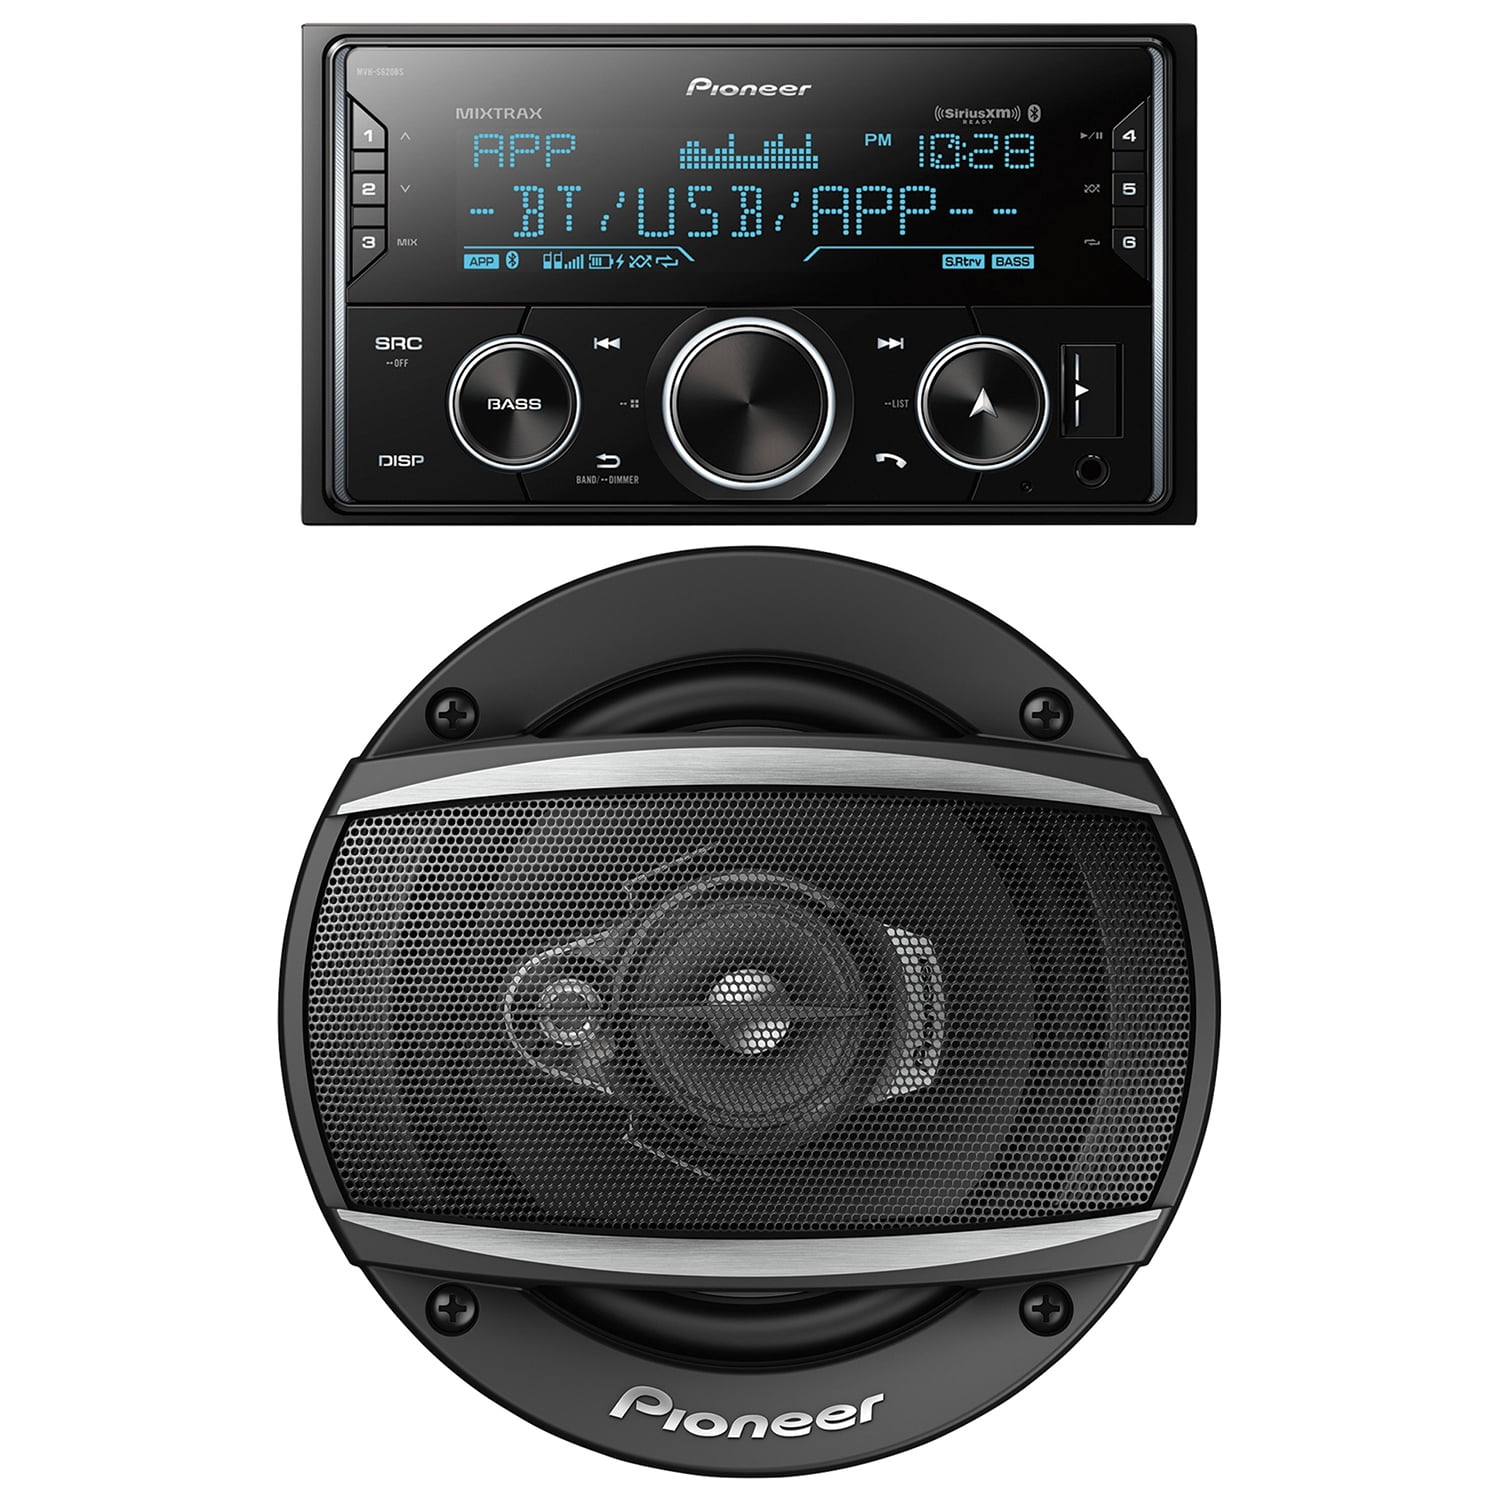 Pioneer MVH-S620BS Double DIN Digital Media Receiver with Enhanced Audio Functions Improved ARC App Compatibility and SiriusXM-Ready Built-in Bluetooth MIXTRAX 